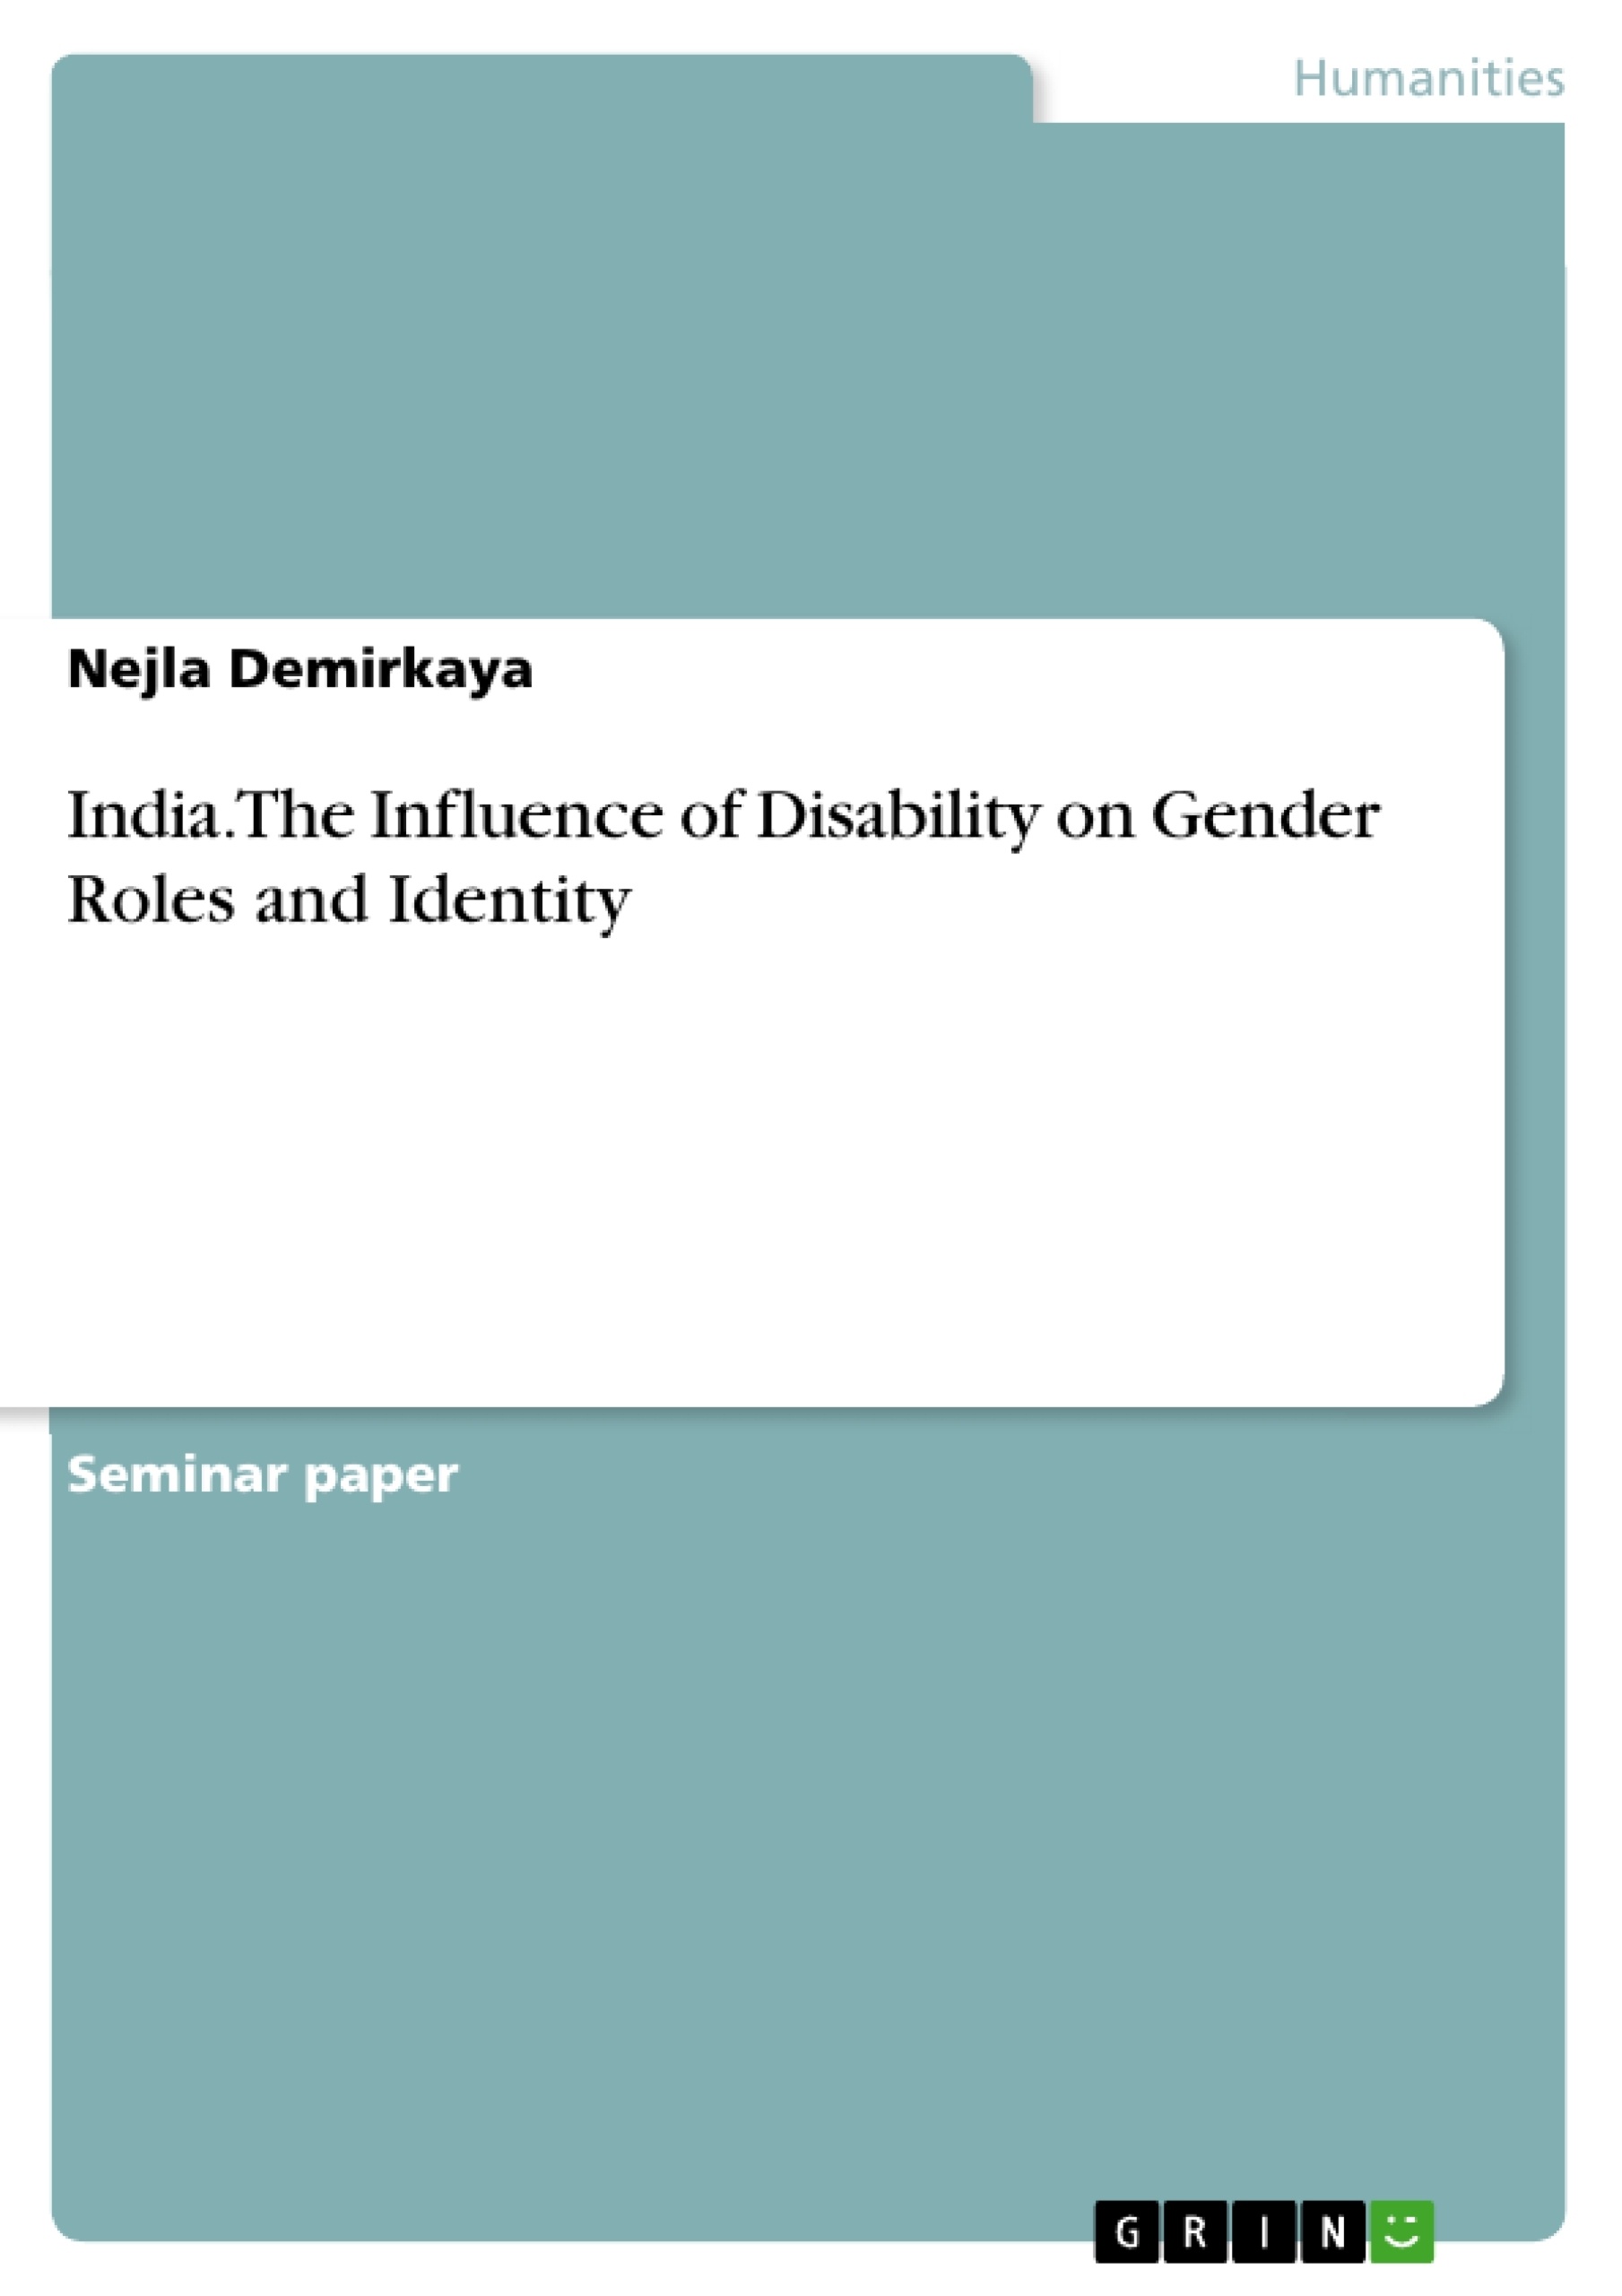 Title: India. The Influence of Disability on Gender Roles and Identity